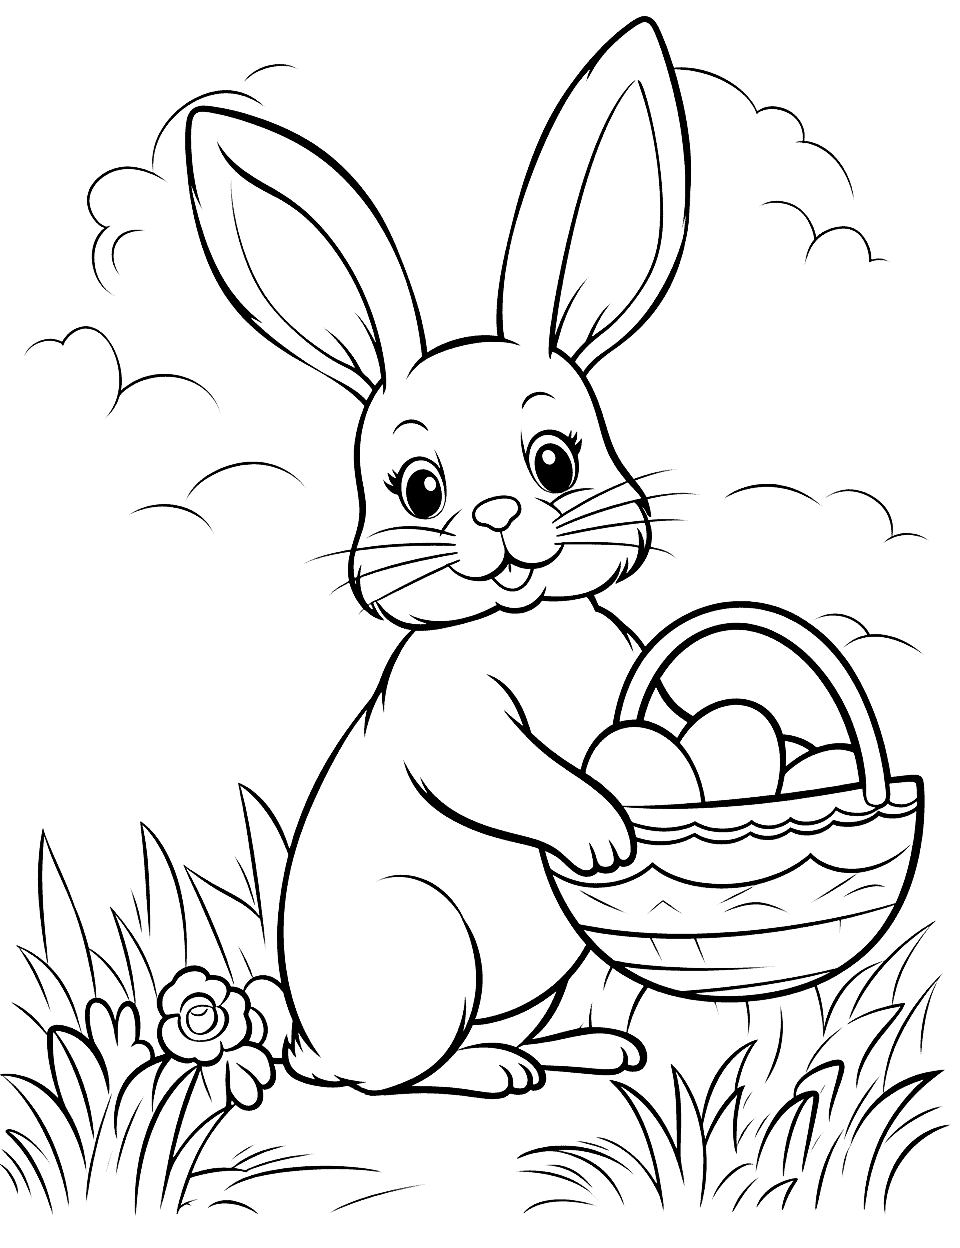 Easter Bunny with a Basket Coloring Page - A cheerful bunny carrying a basket full of colorful Easter eggs.